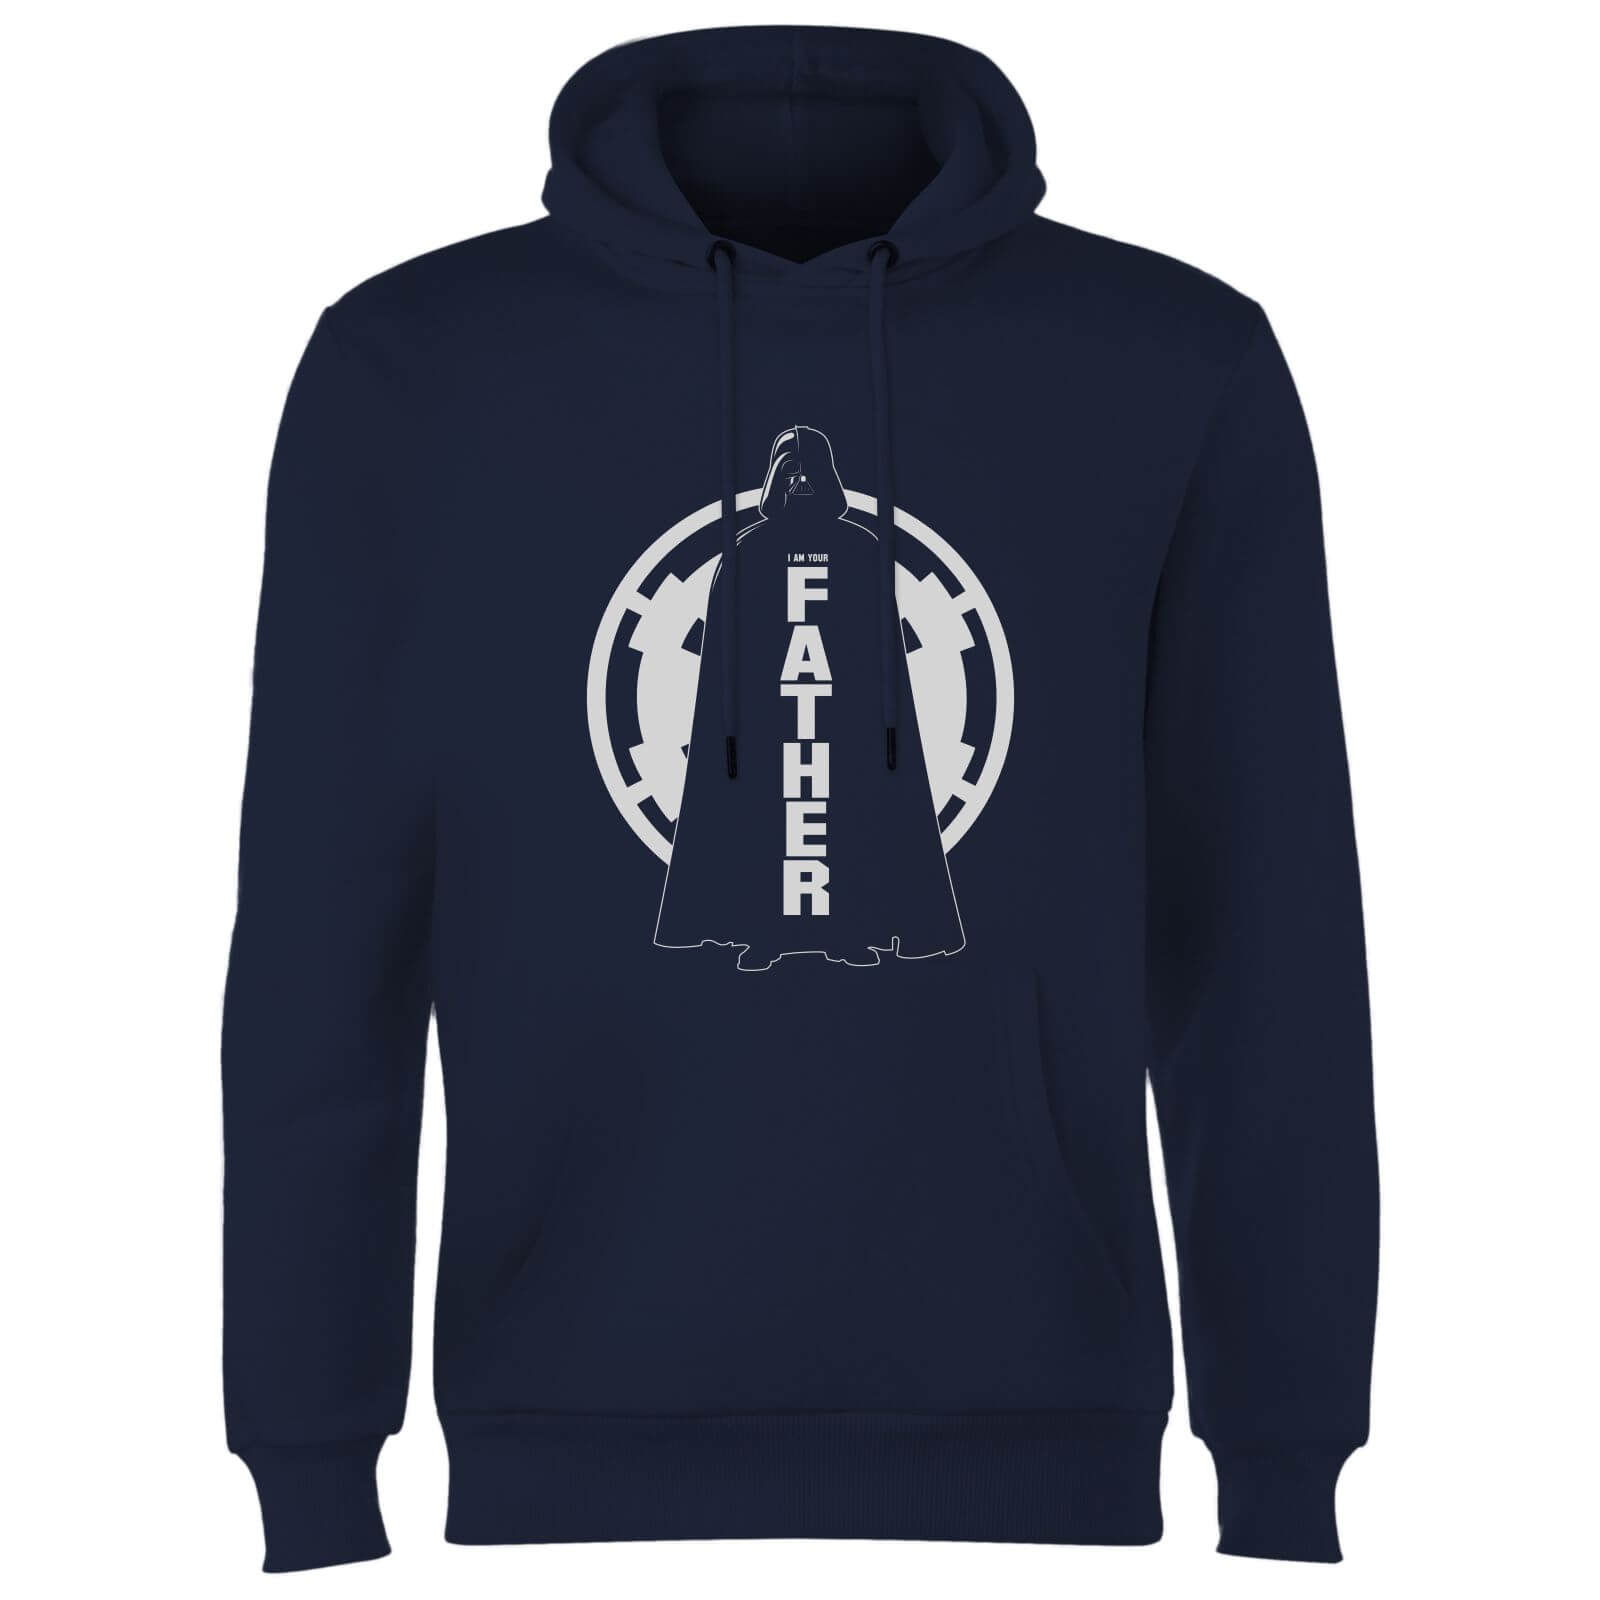 Star Wars Darth Vader Father Imperial Hoodie - Navy - L